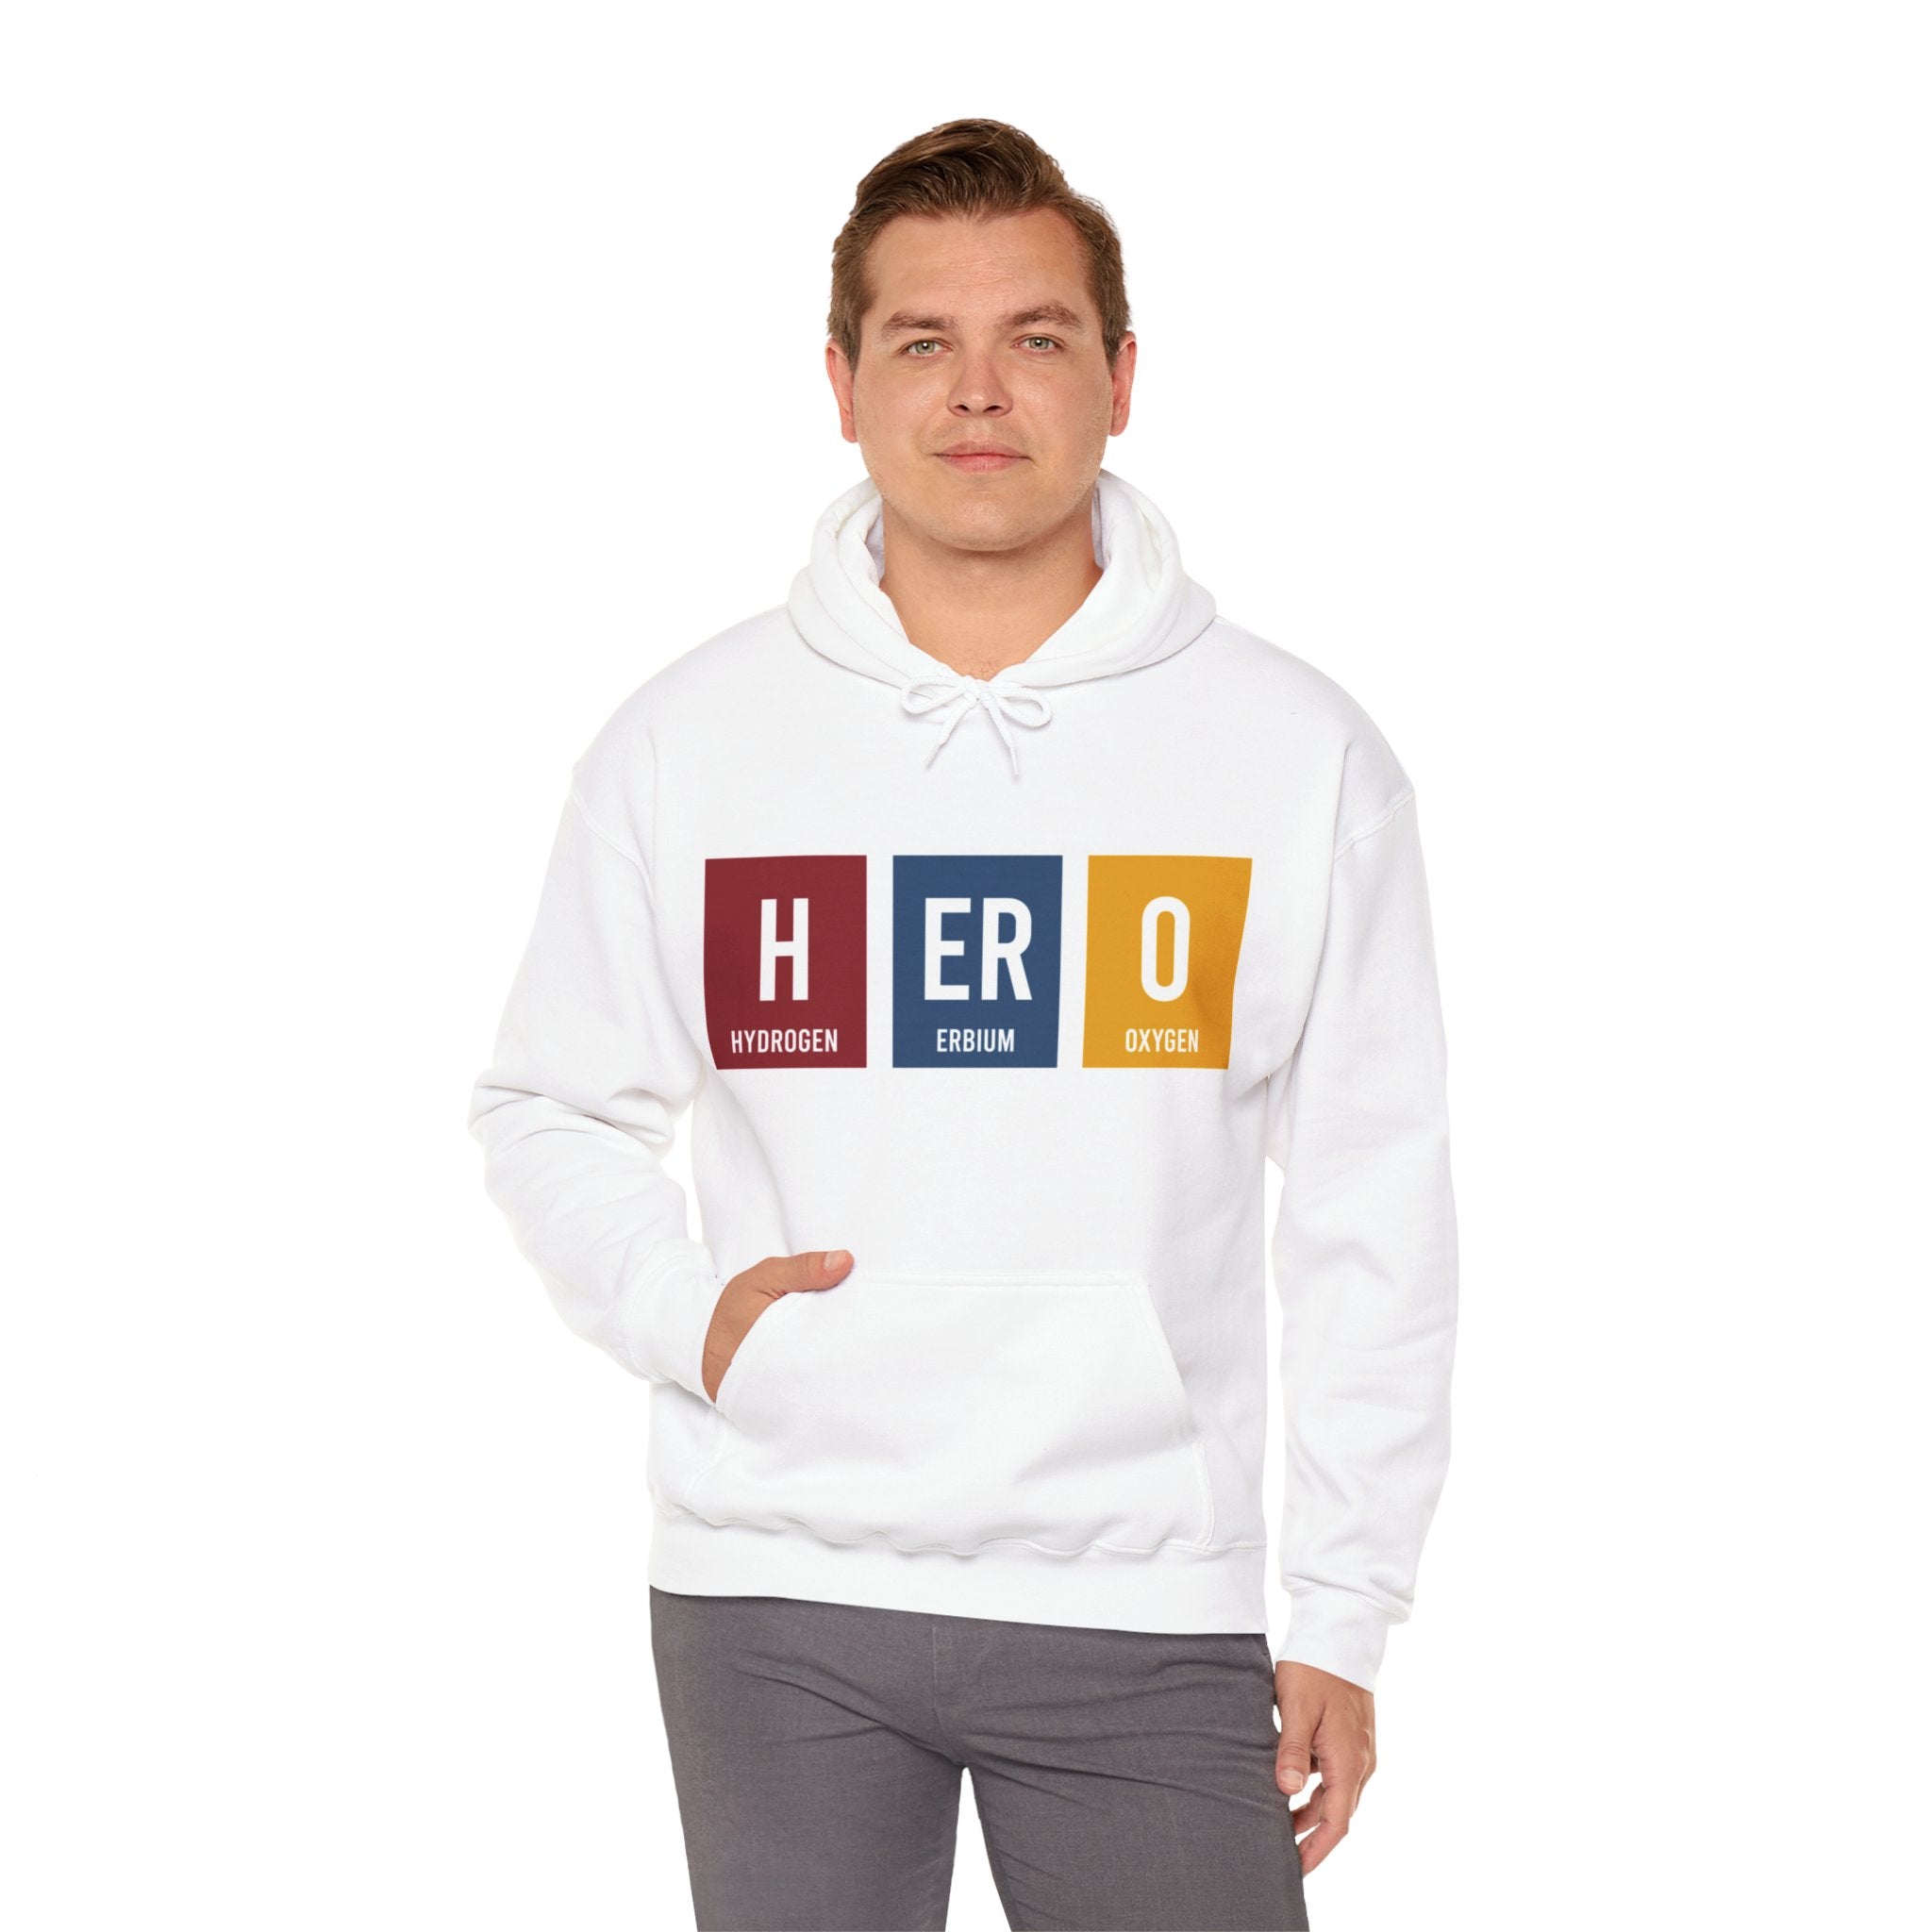 A person wearing a white HERO - Hooded Sweatshirt stands with their hand in the hoodie pocket, embodying subtle heroism.